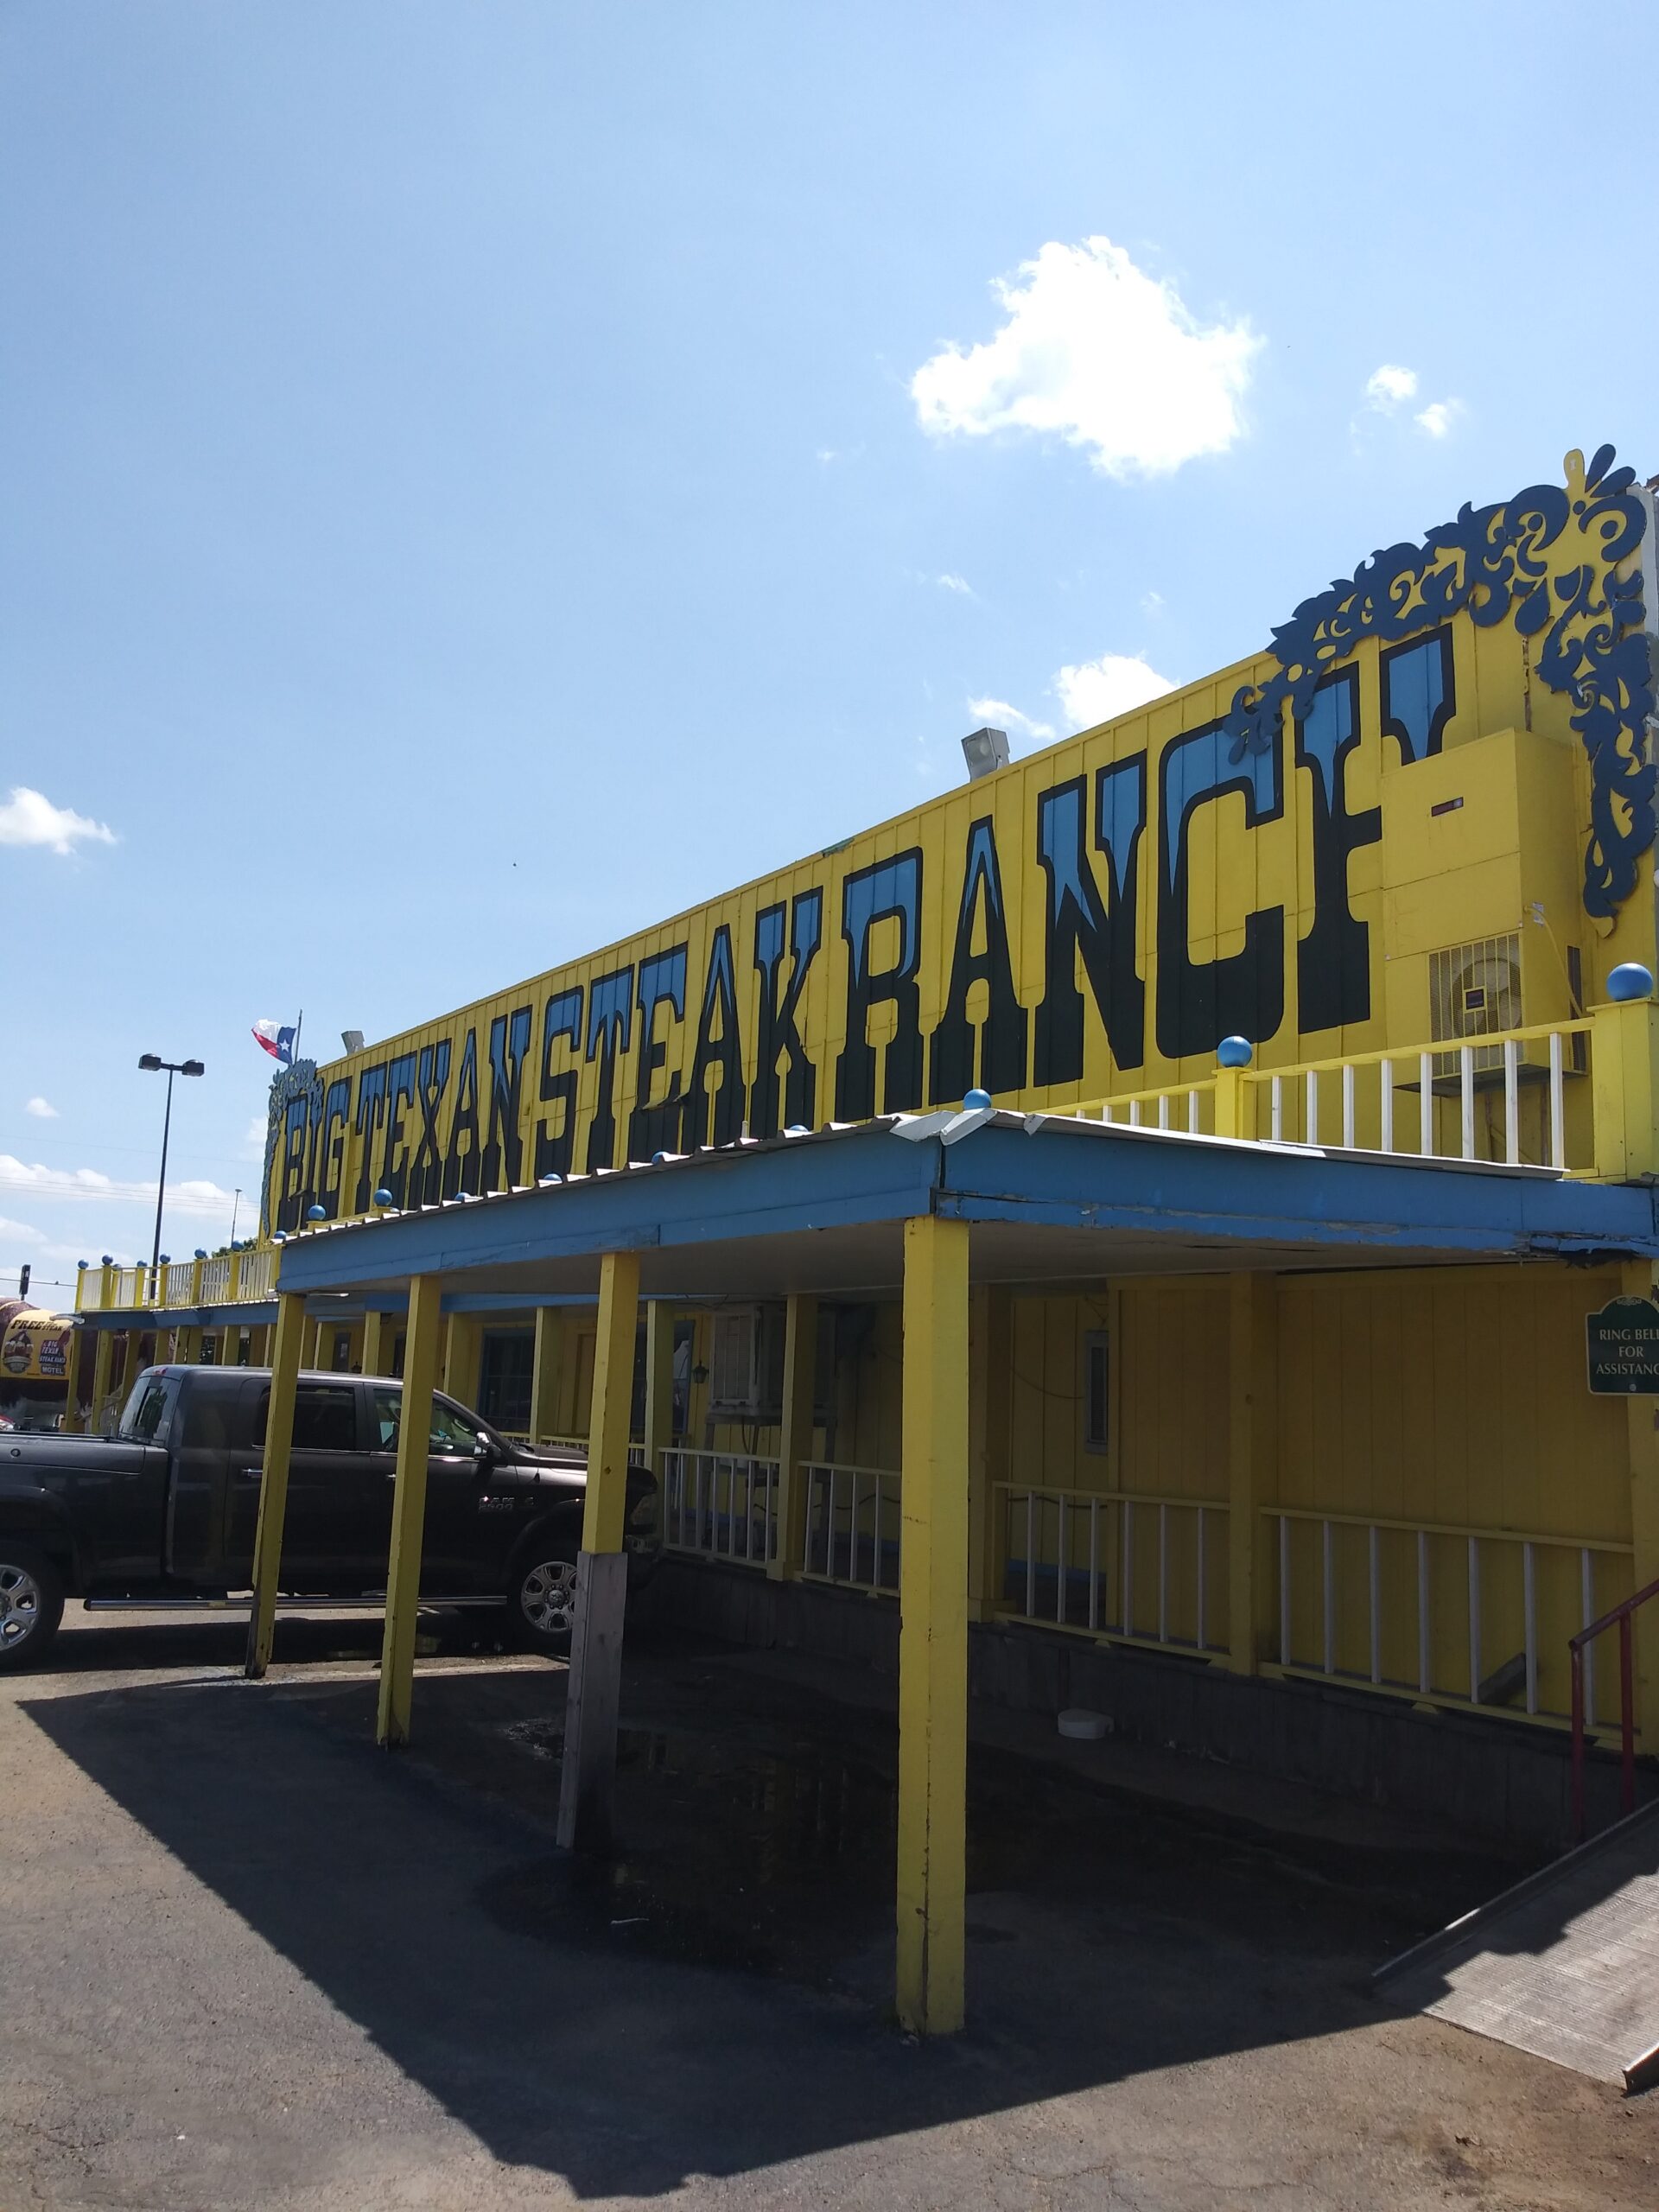 The Big Texan in Amarillo: An Authentic Texas Experience